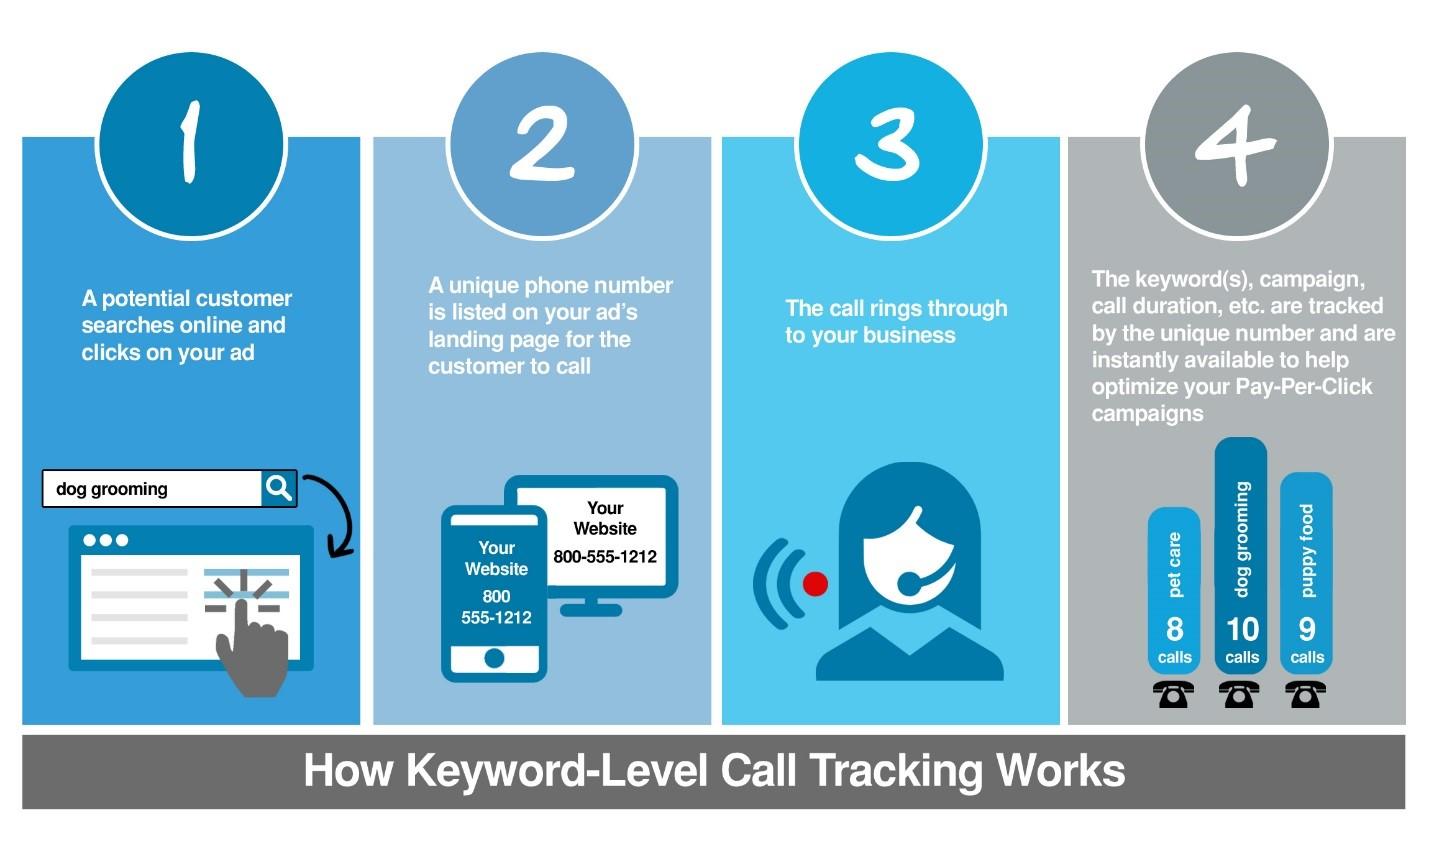 Call abandon rate how keyword-level call tracking works